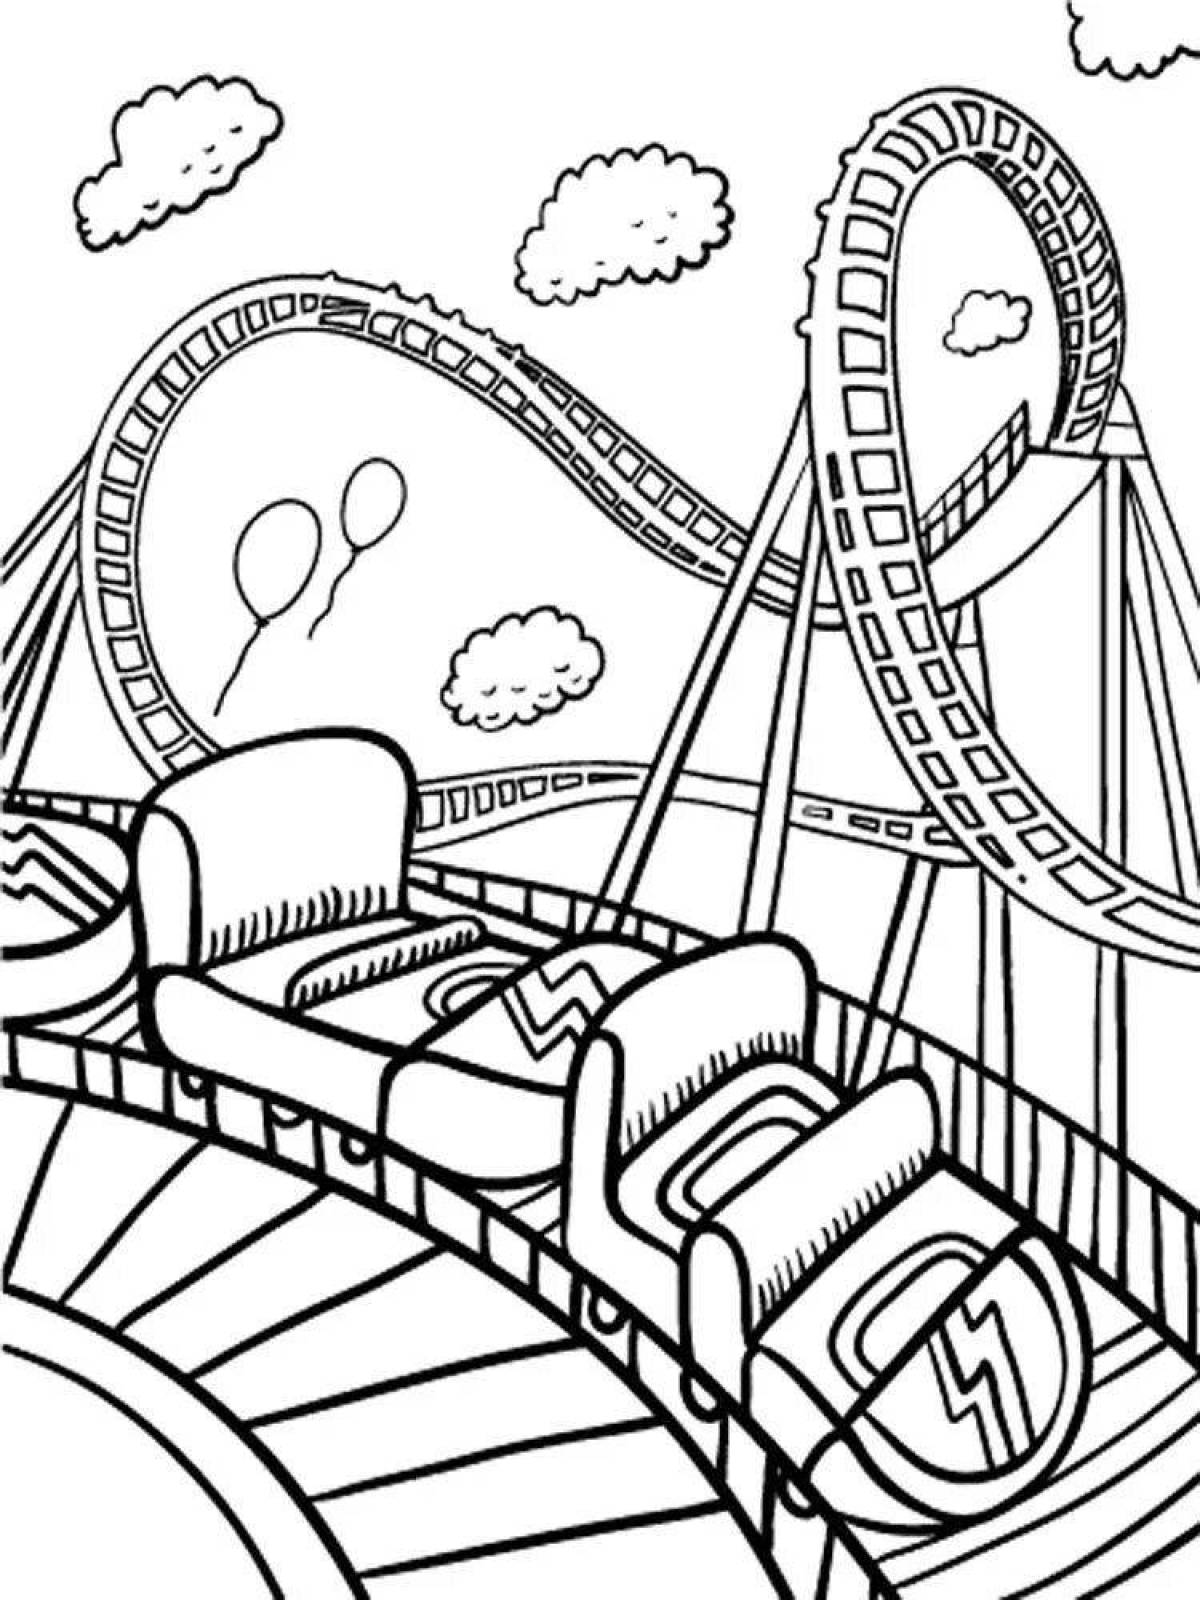 Vibrant park coloring pages for kids